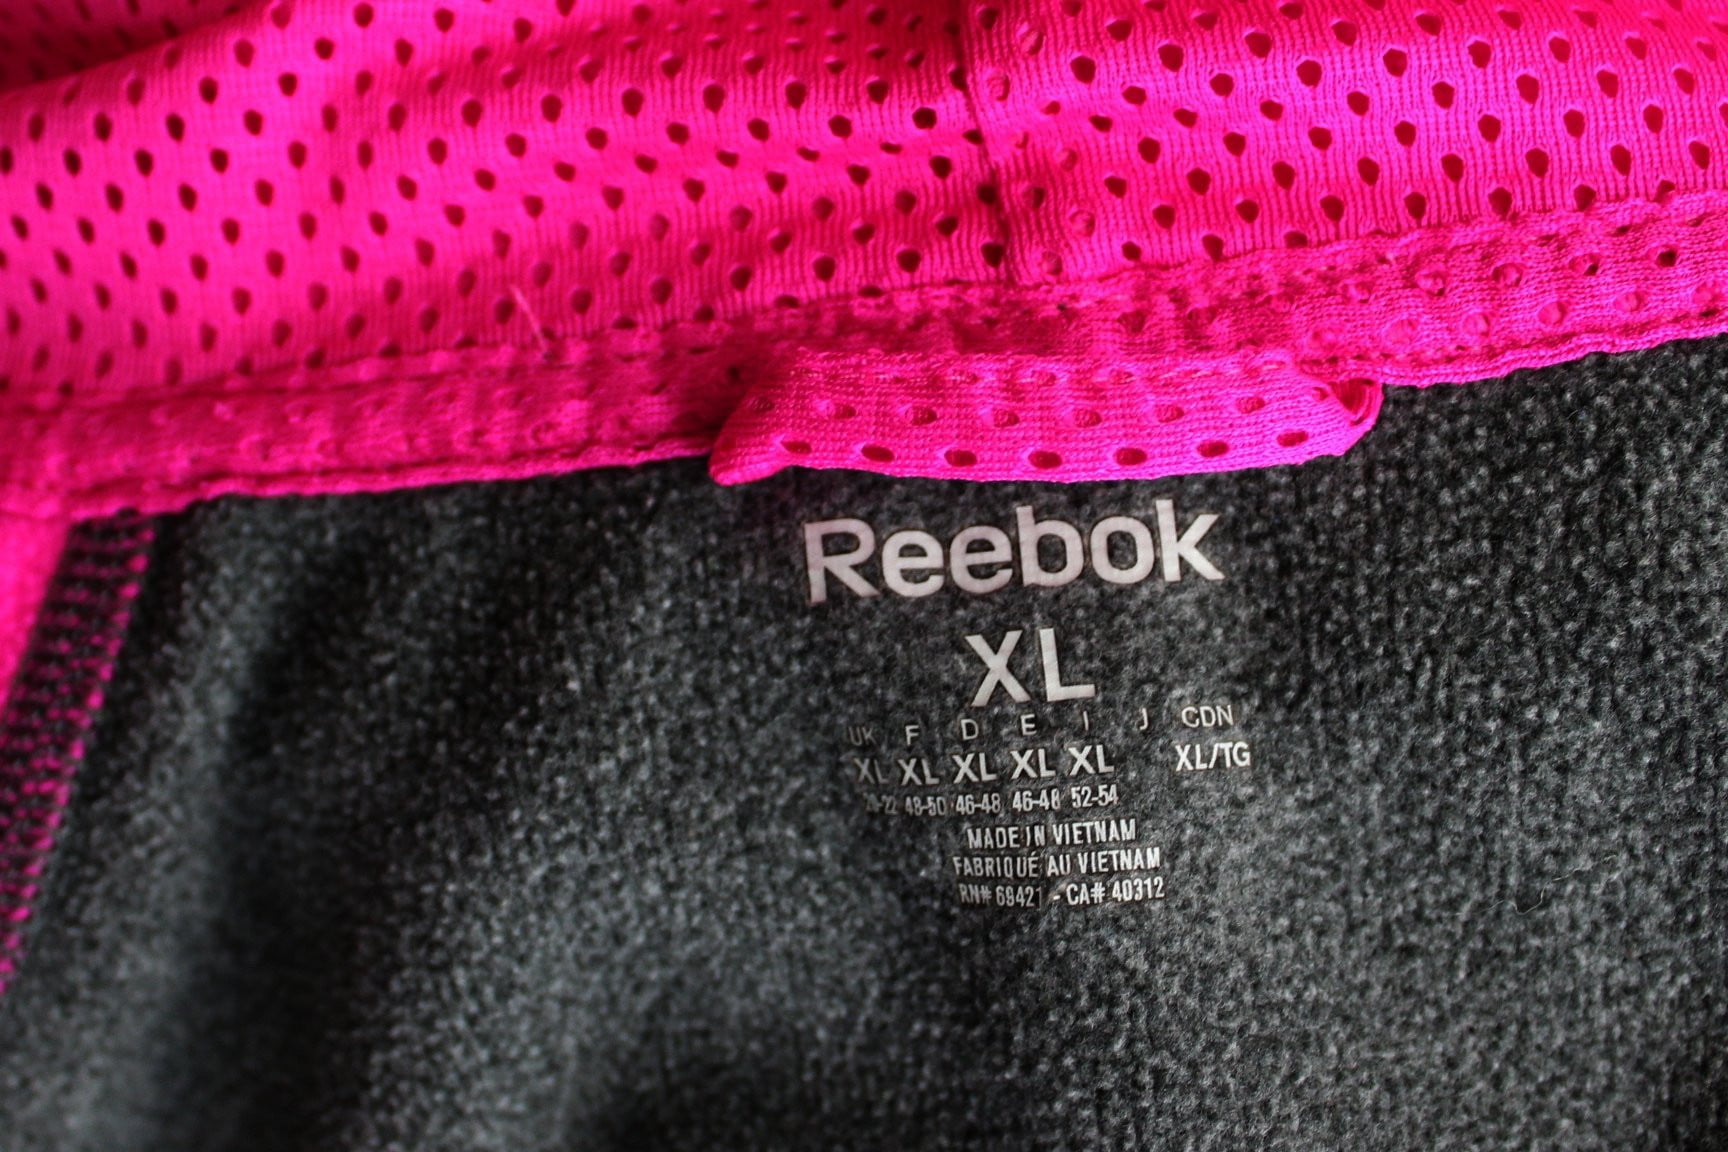 Reebok Activewear Womens Hoodie Jacket XL - Polyester Spandex Pink Grey better than buying new